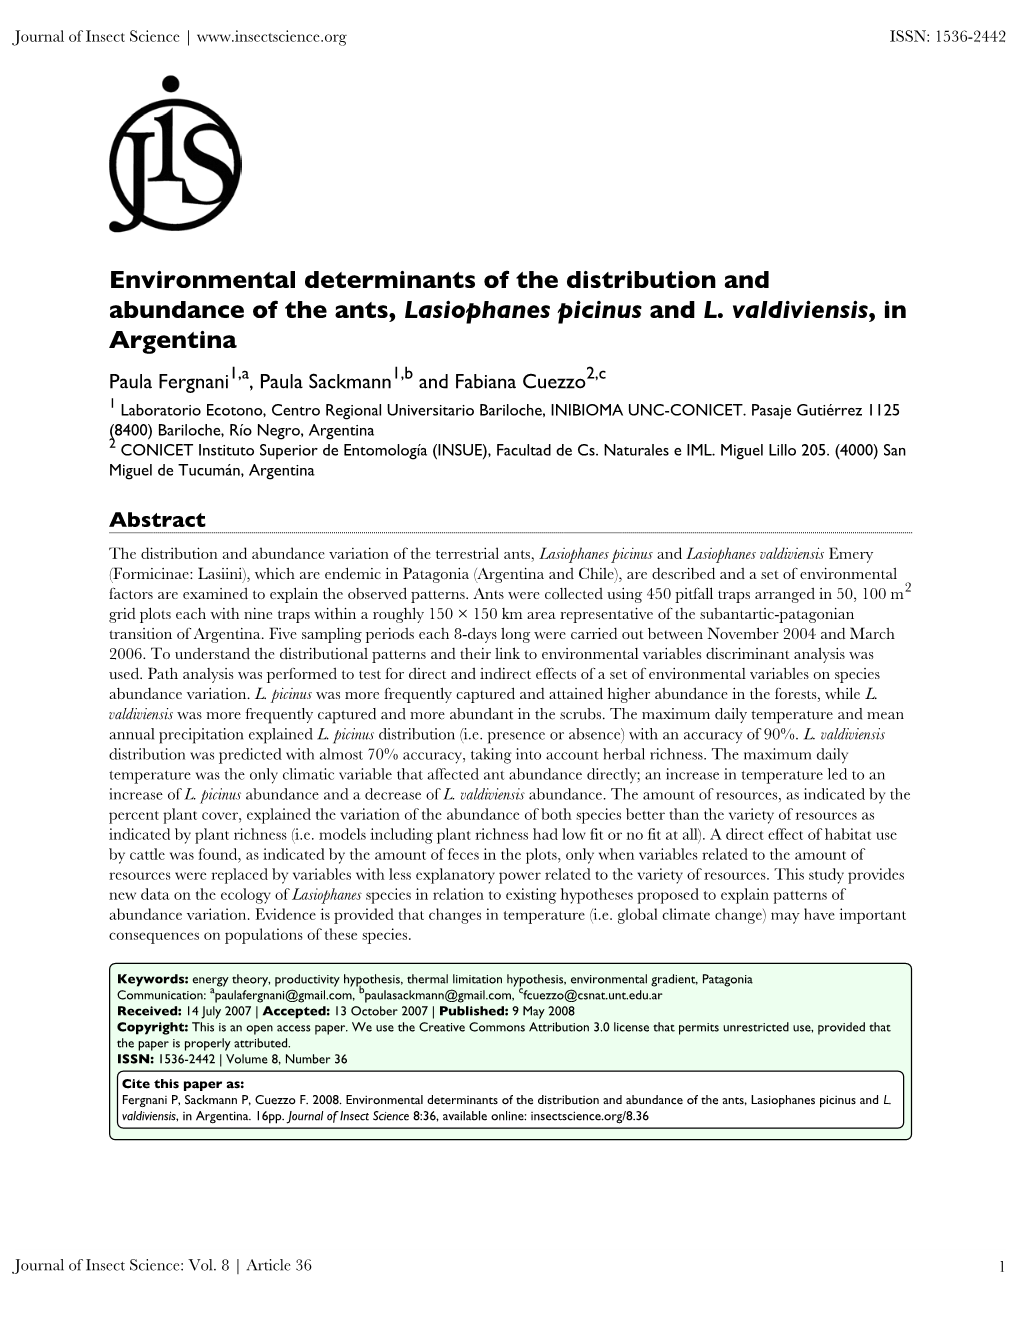 Environmental Determinants of the Distribution and Abundance of the Ants, Lasiophanes Picinus and L